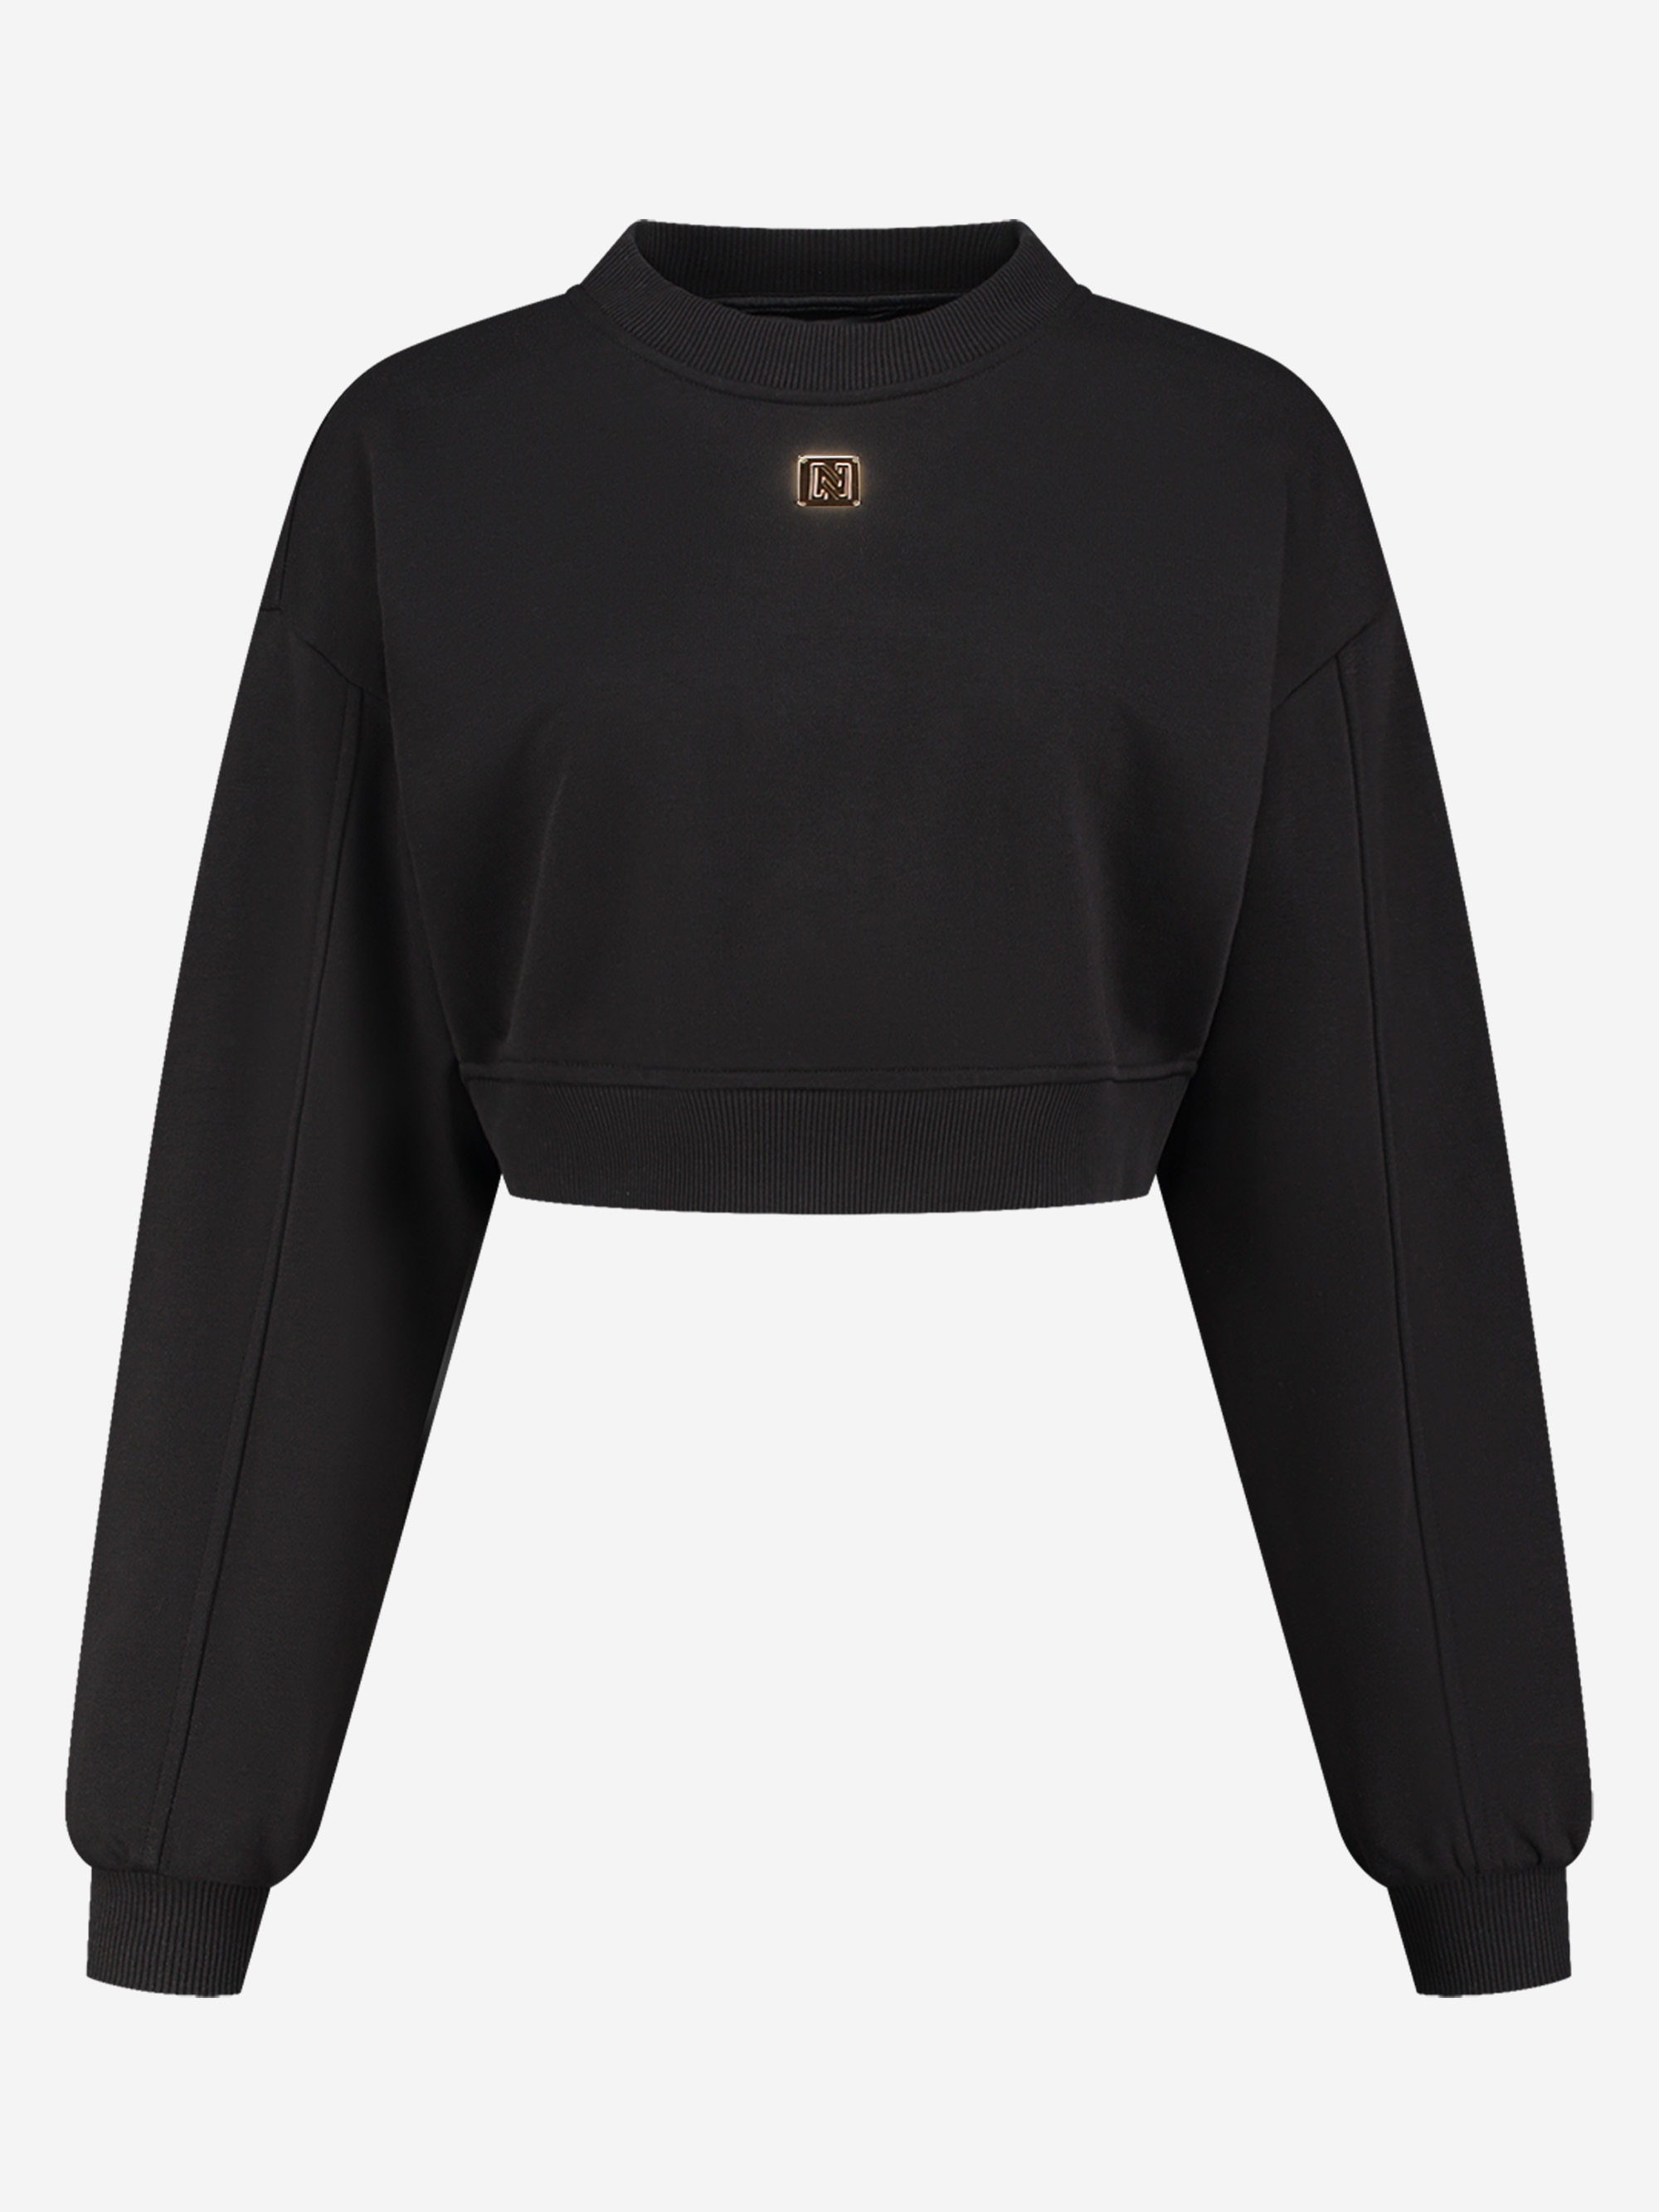 Sweater with metal logo